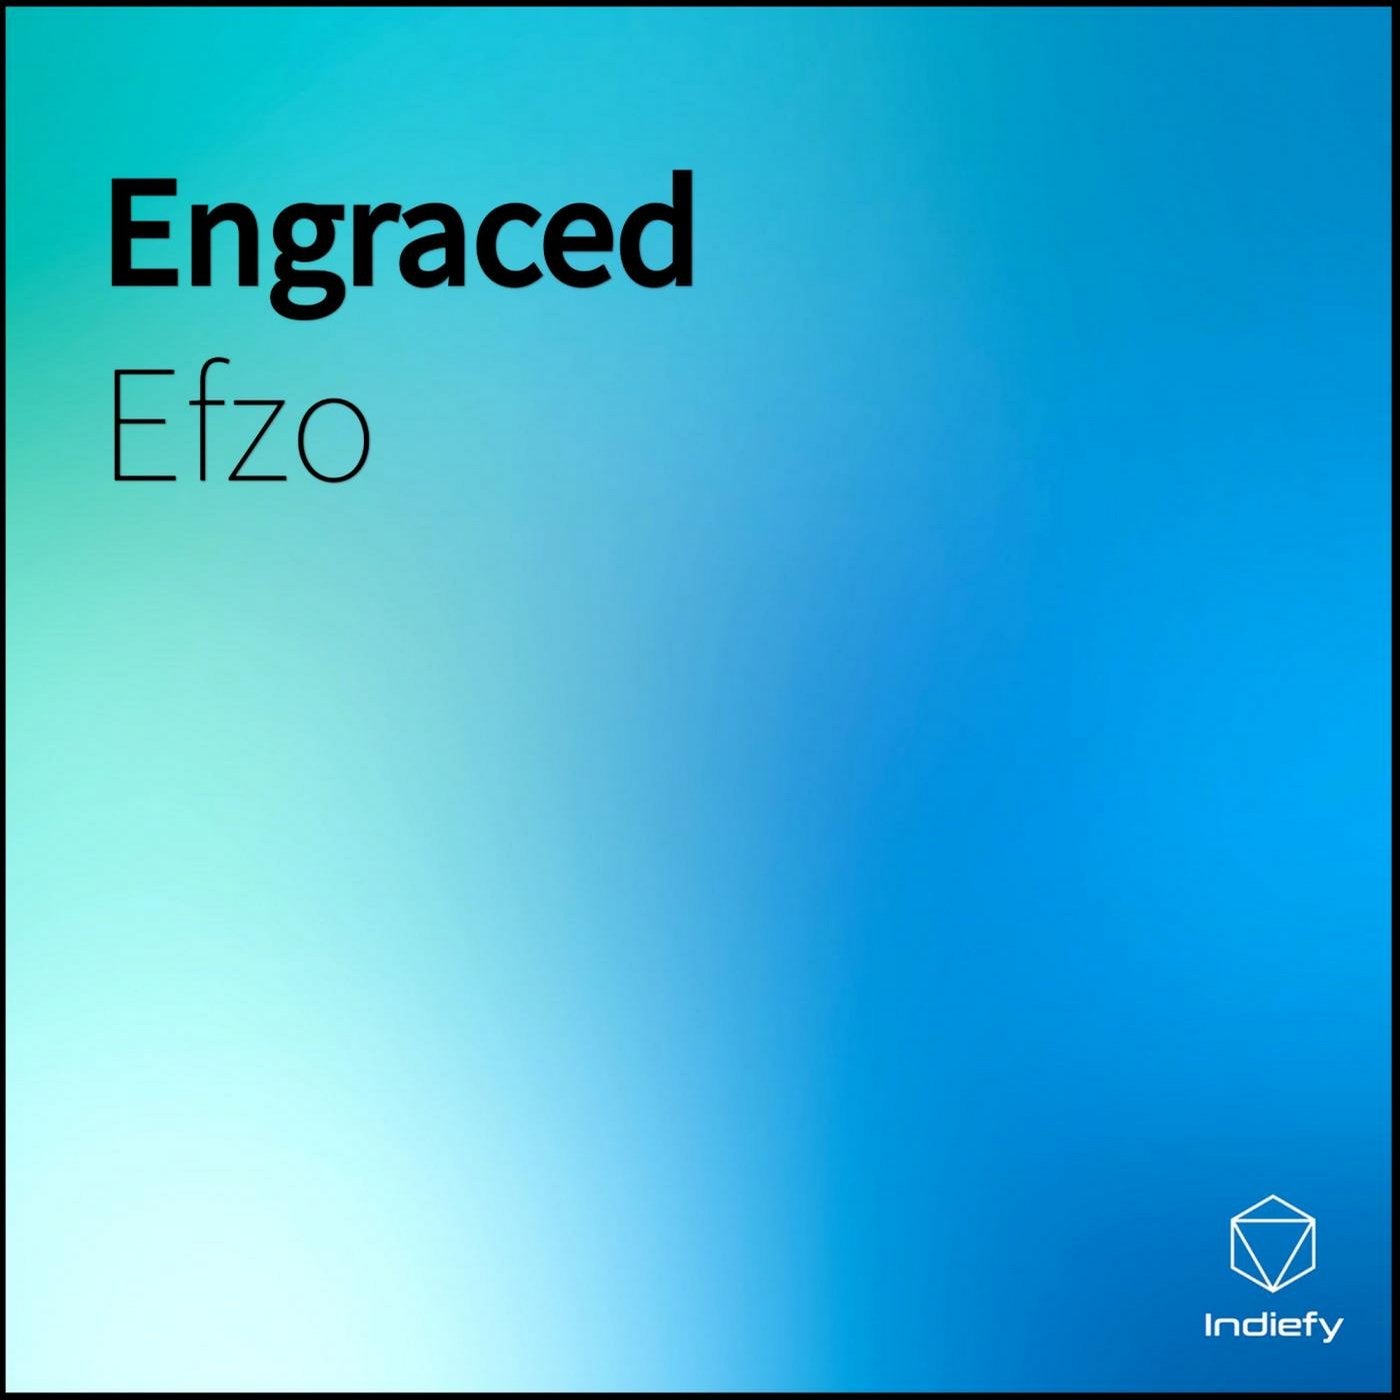 Engraced